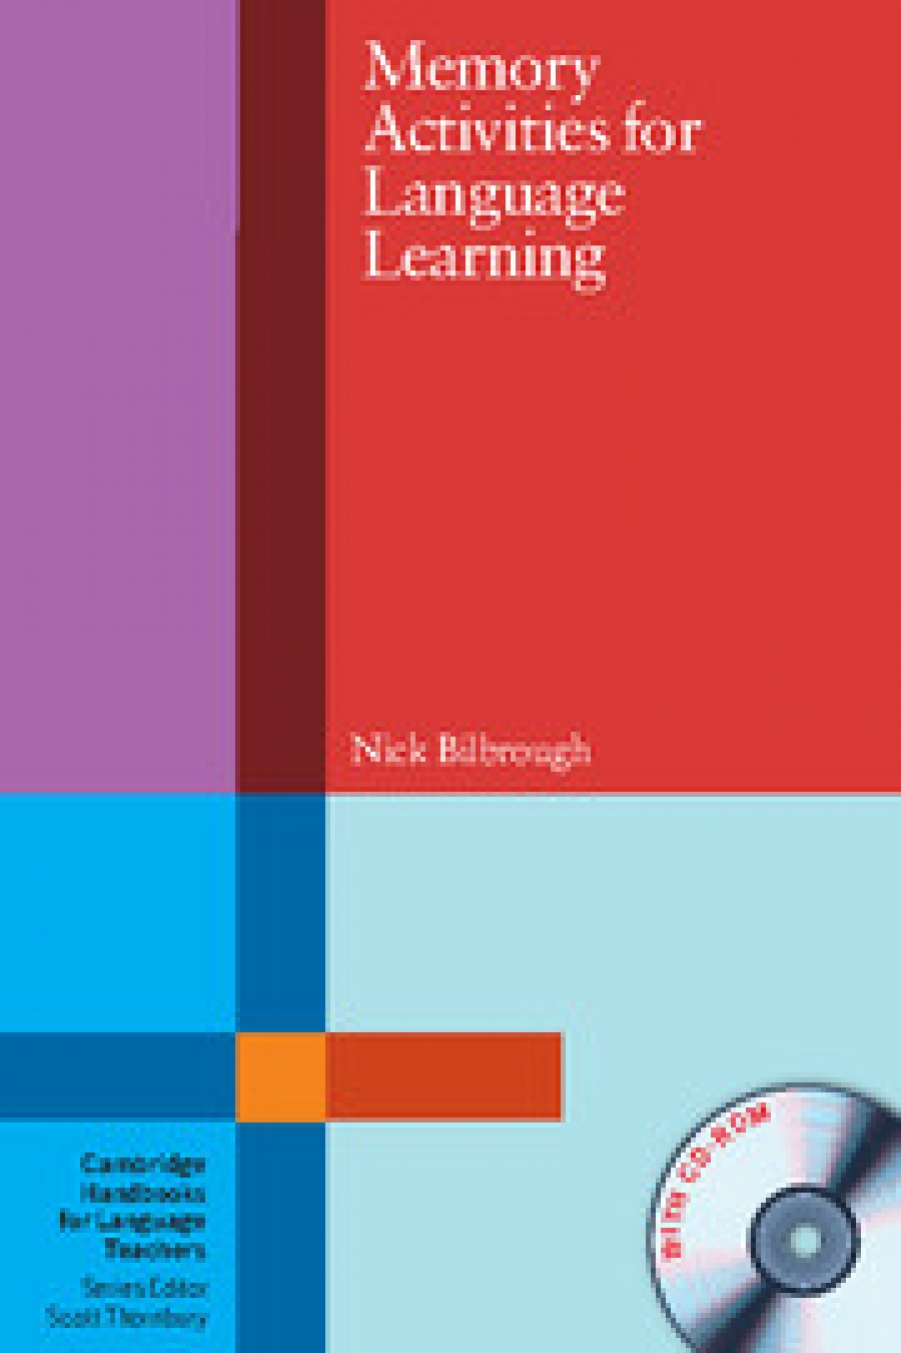 Bilbrough Nick Memory Activities for Language Learning with CD-ROM 